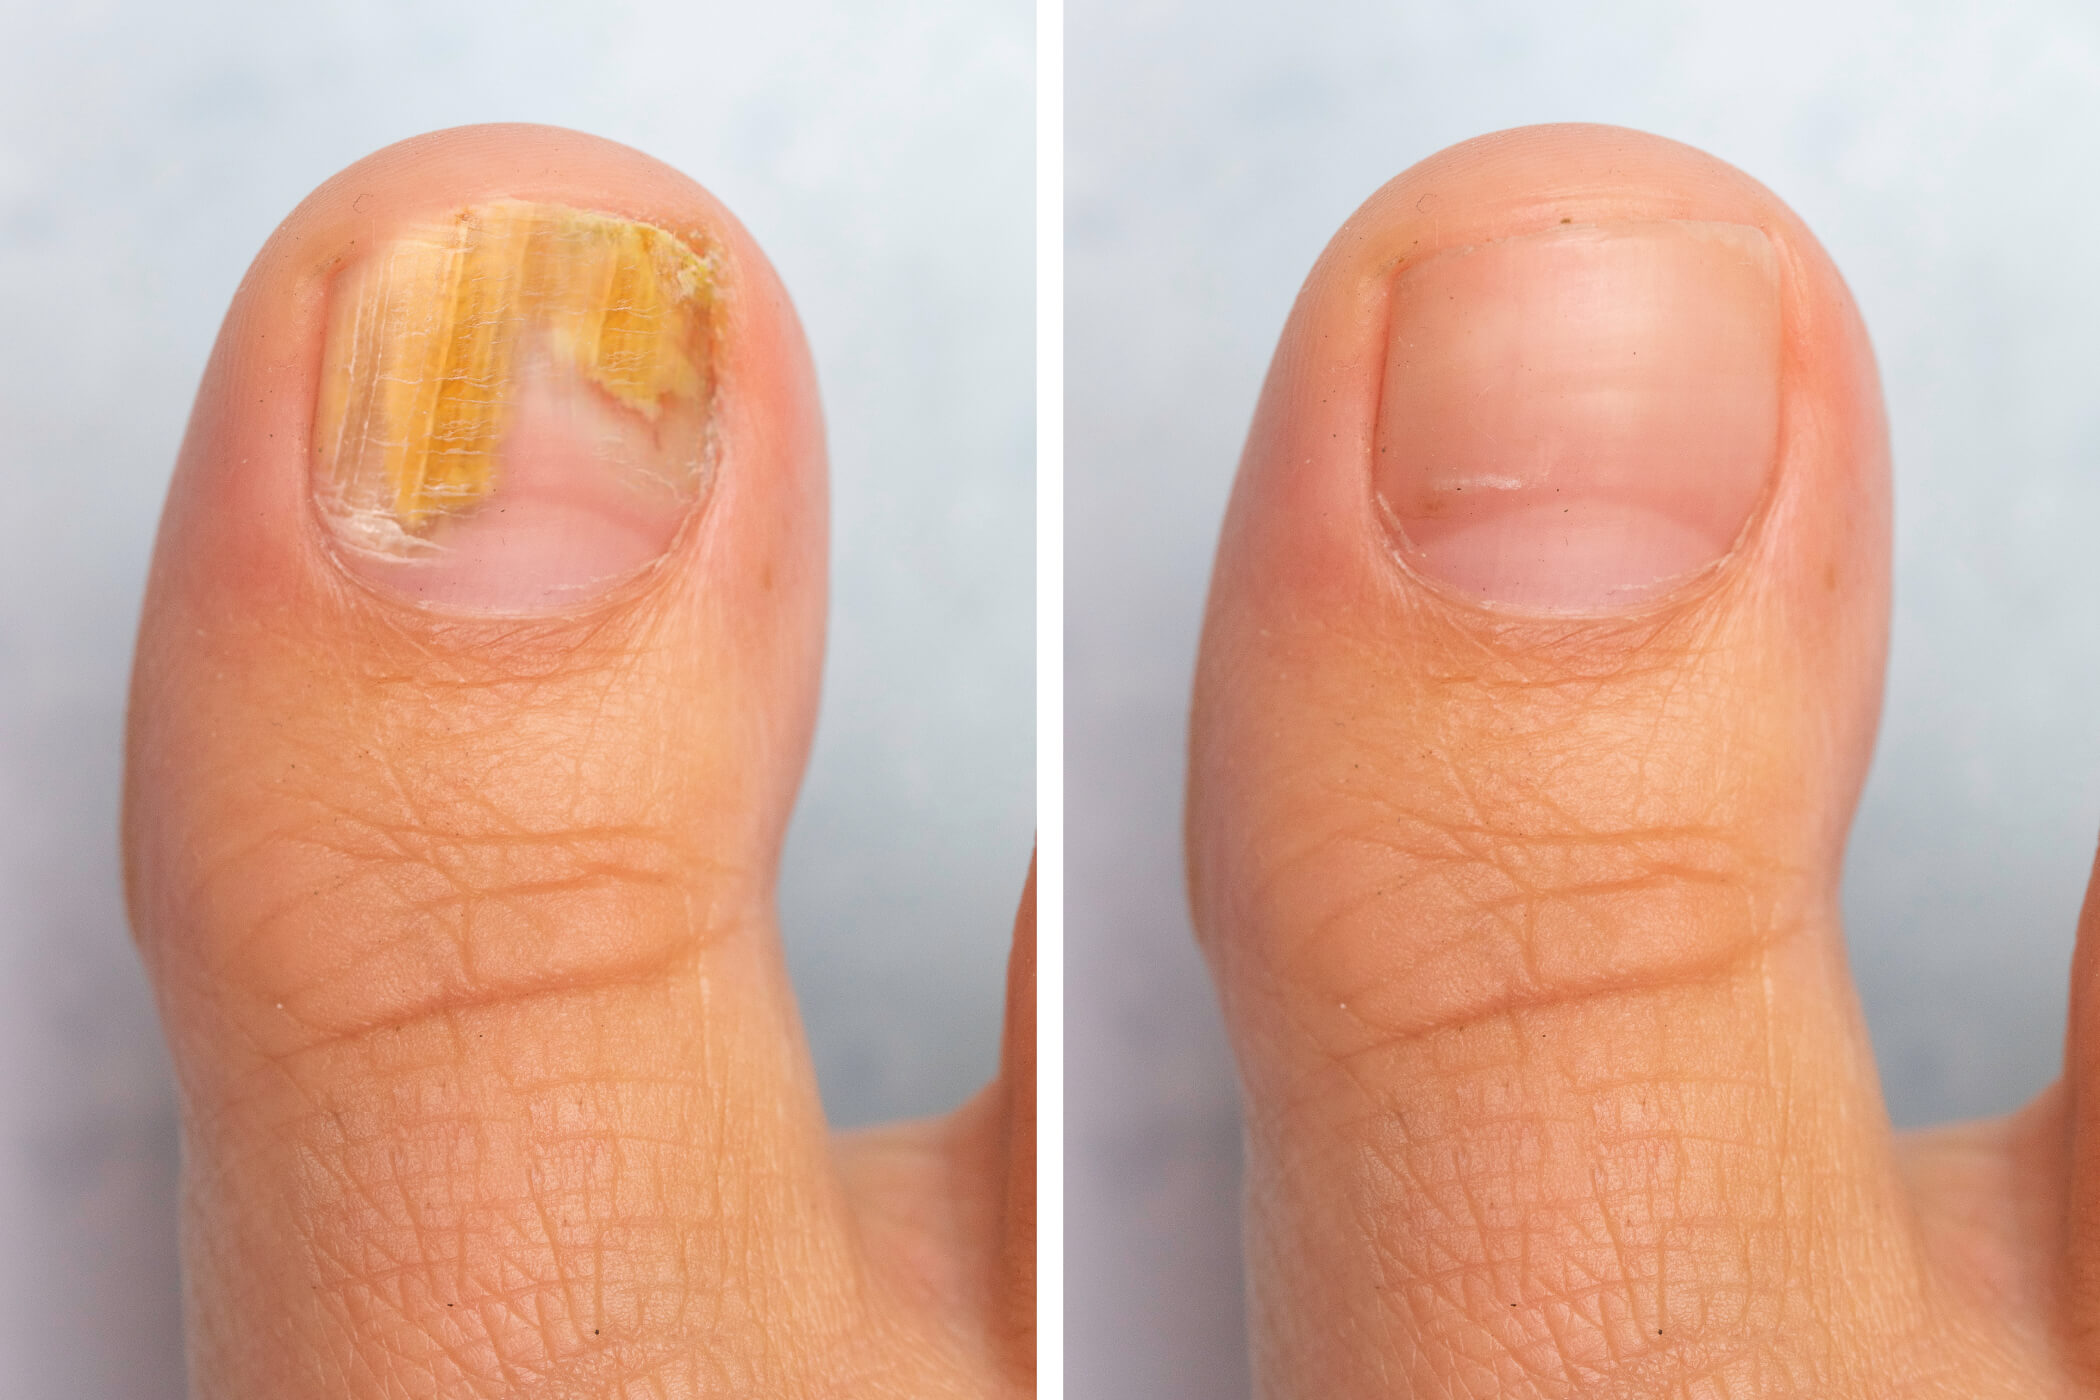 Fungal Nail Infection - MK Feet Podiatry Clinic